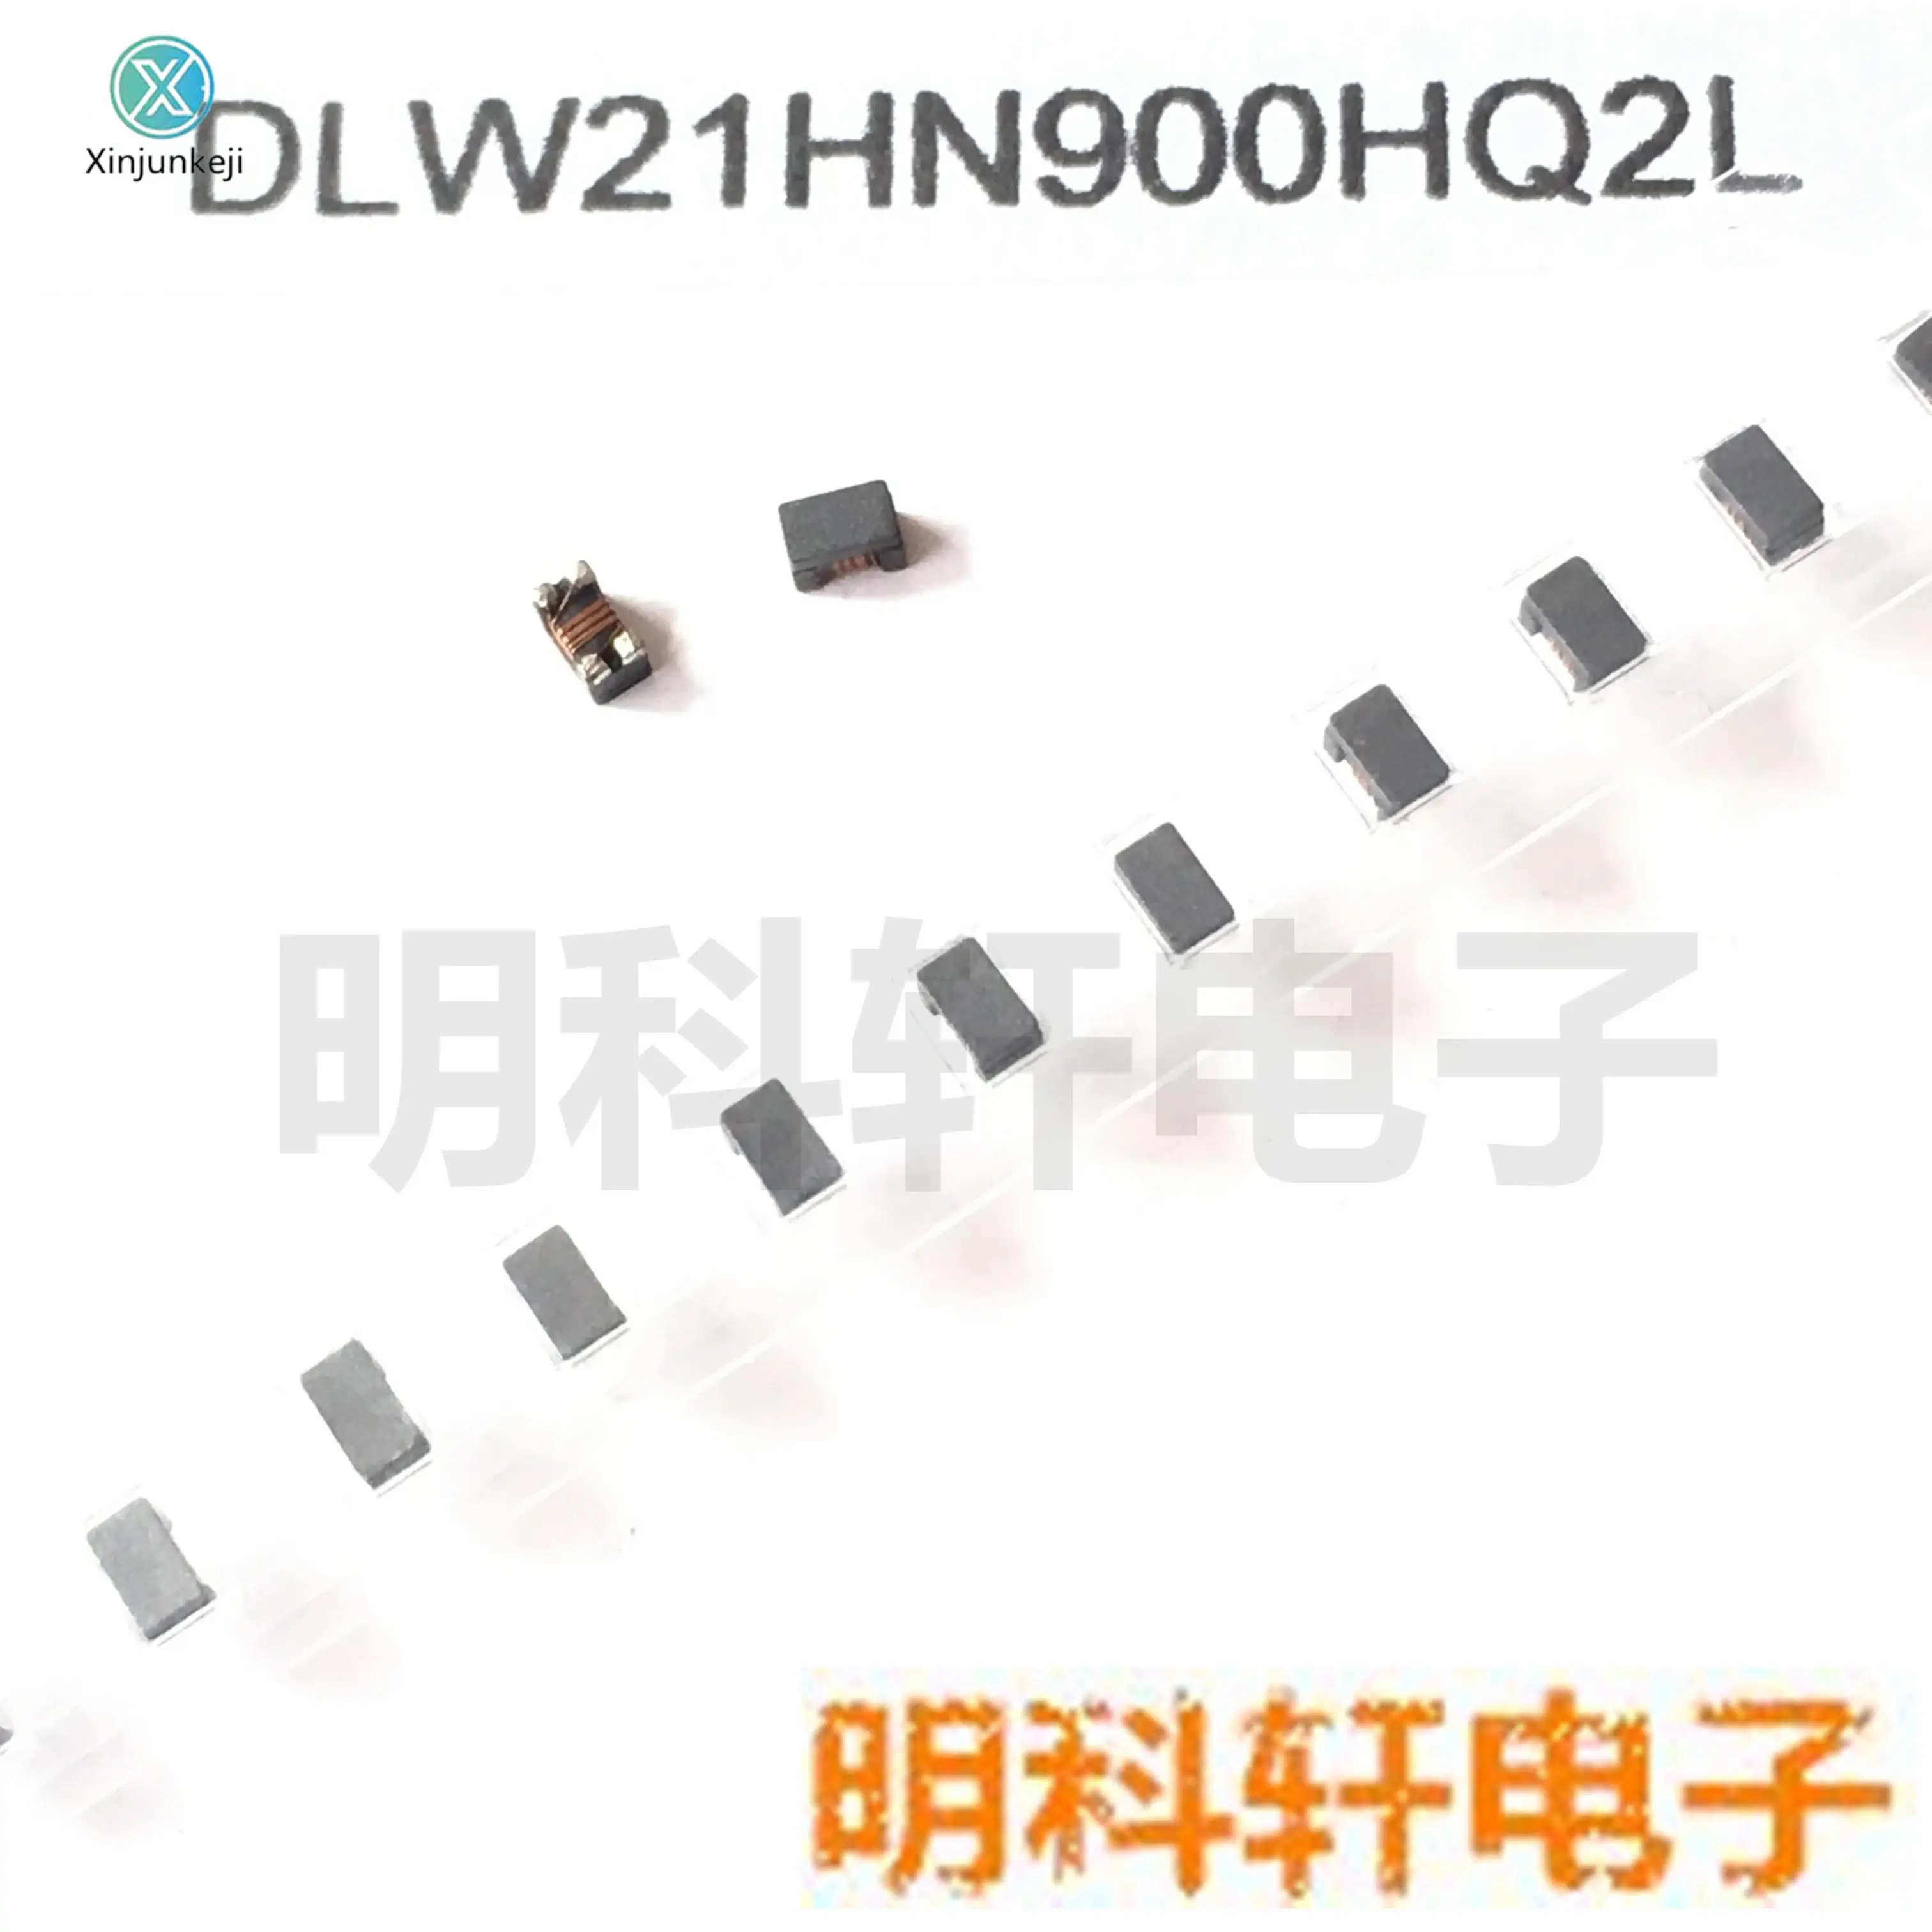 

30pcs orginal new DLW21HN900HQ2L SMD common mode inductor filter 0805 90R